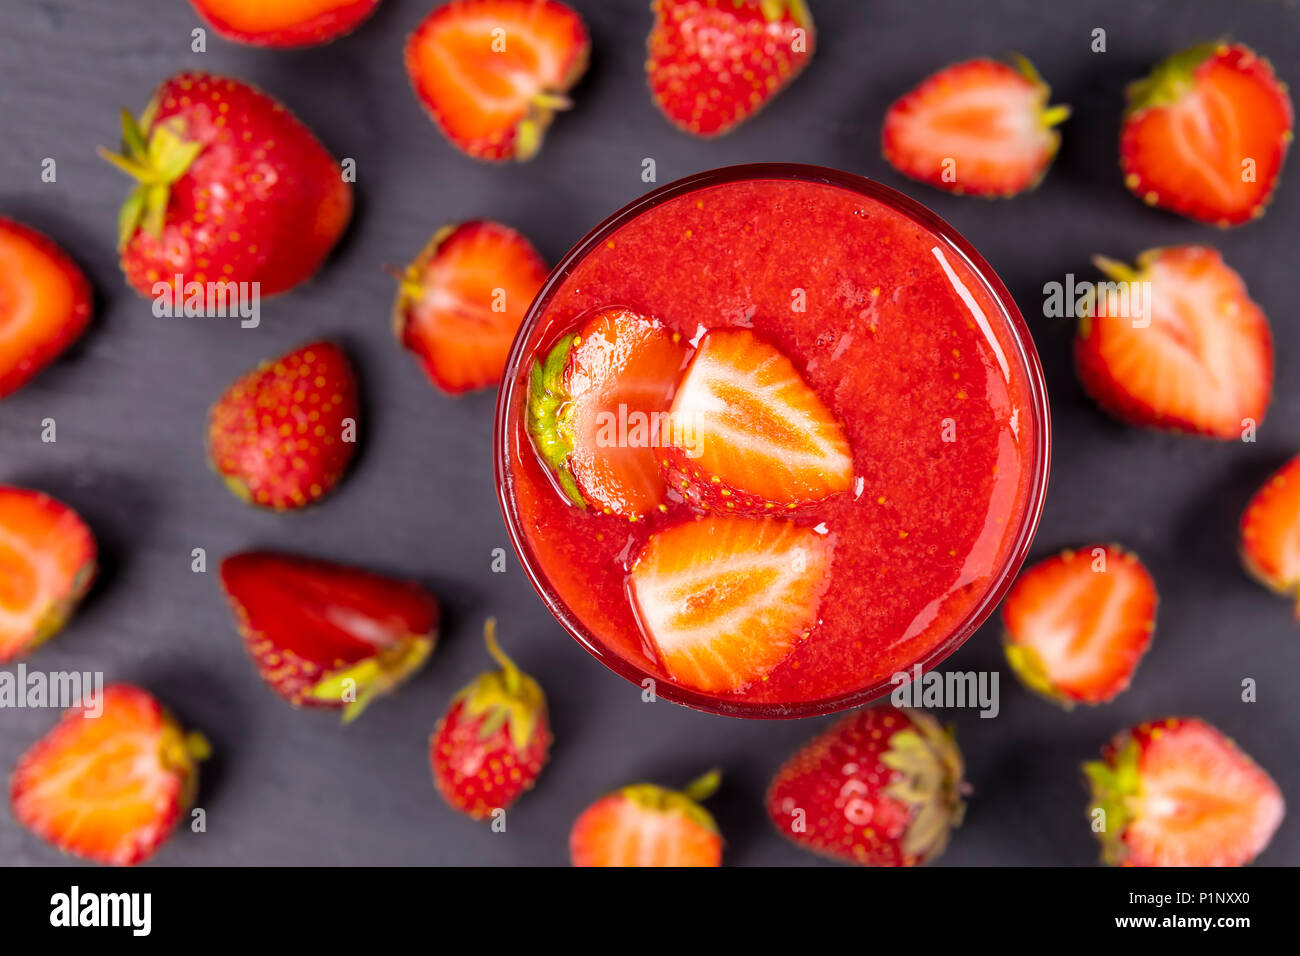 Strawberry in fresh smoothie on black table. Healthy drinking concept. Stock Photo